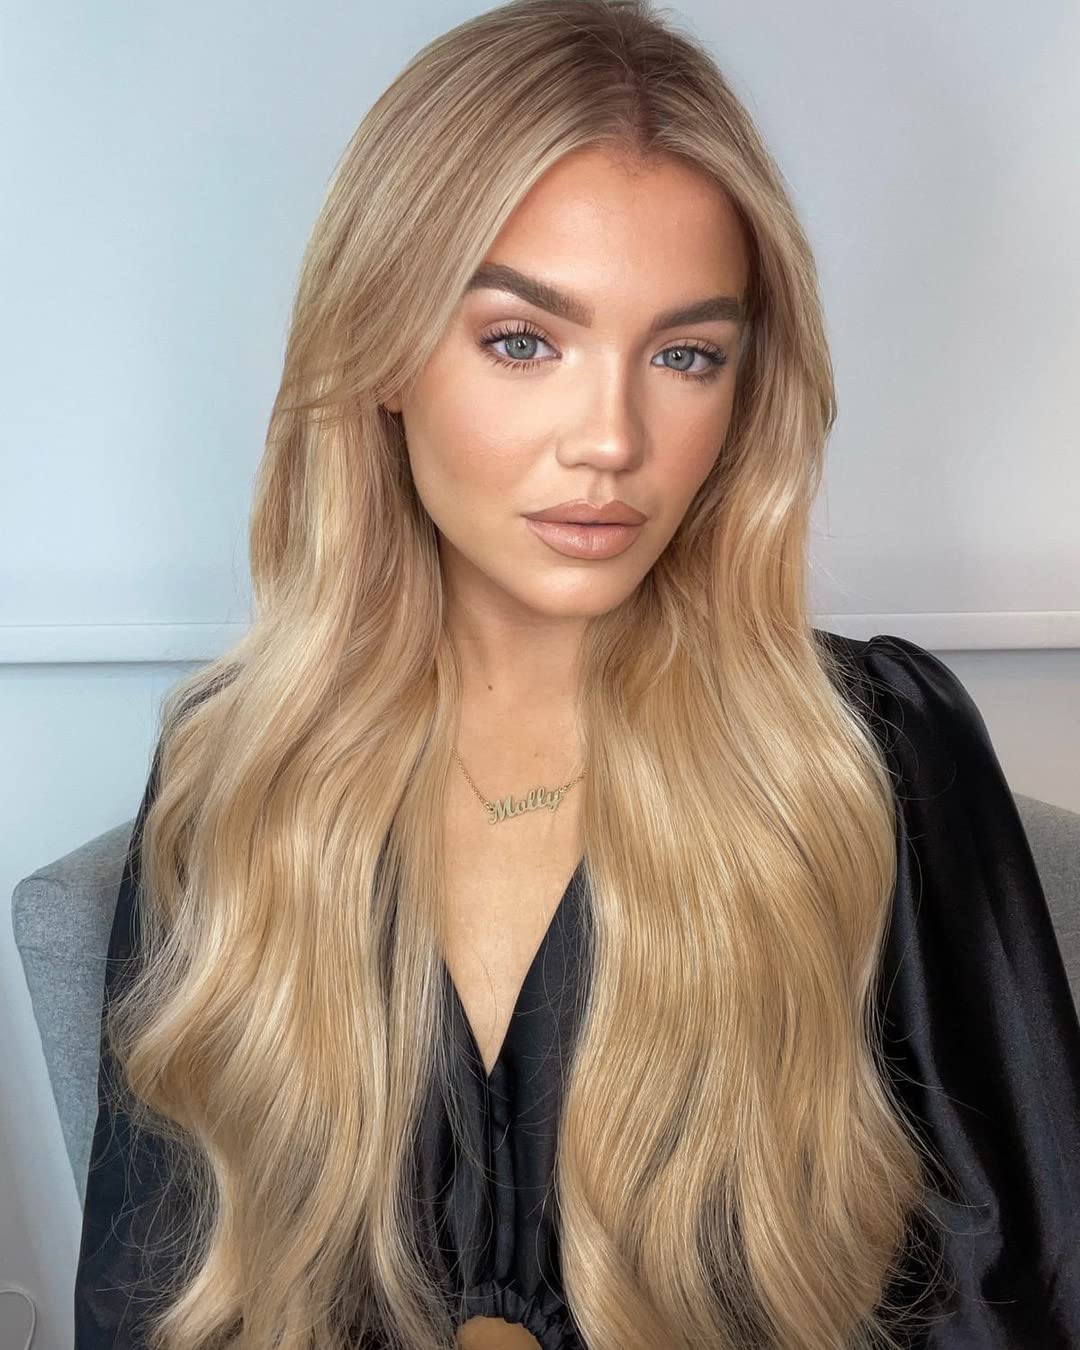 EALGA Blonde Wig,Ombre Brown Light Blonde Lace Front Wig for Women Best Synthetic Hair Wavy Honey Blonde Wigs with Flawless Hairline 22 inches Heat Safe EALGA-001